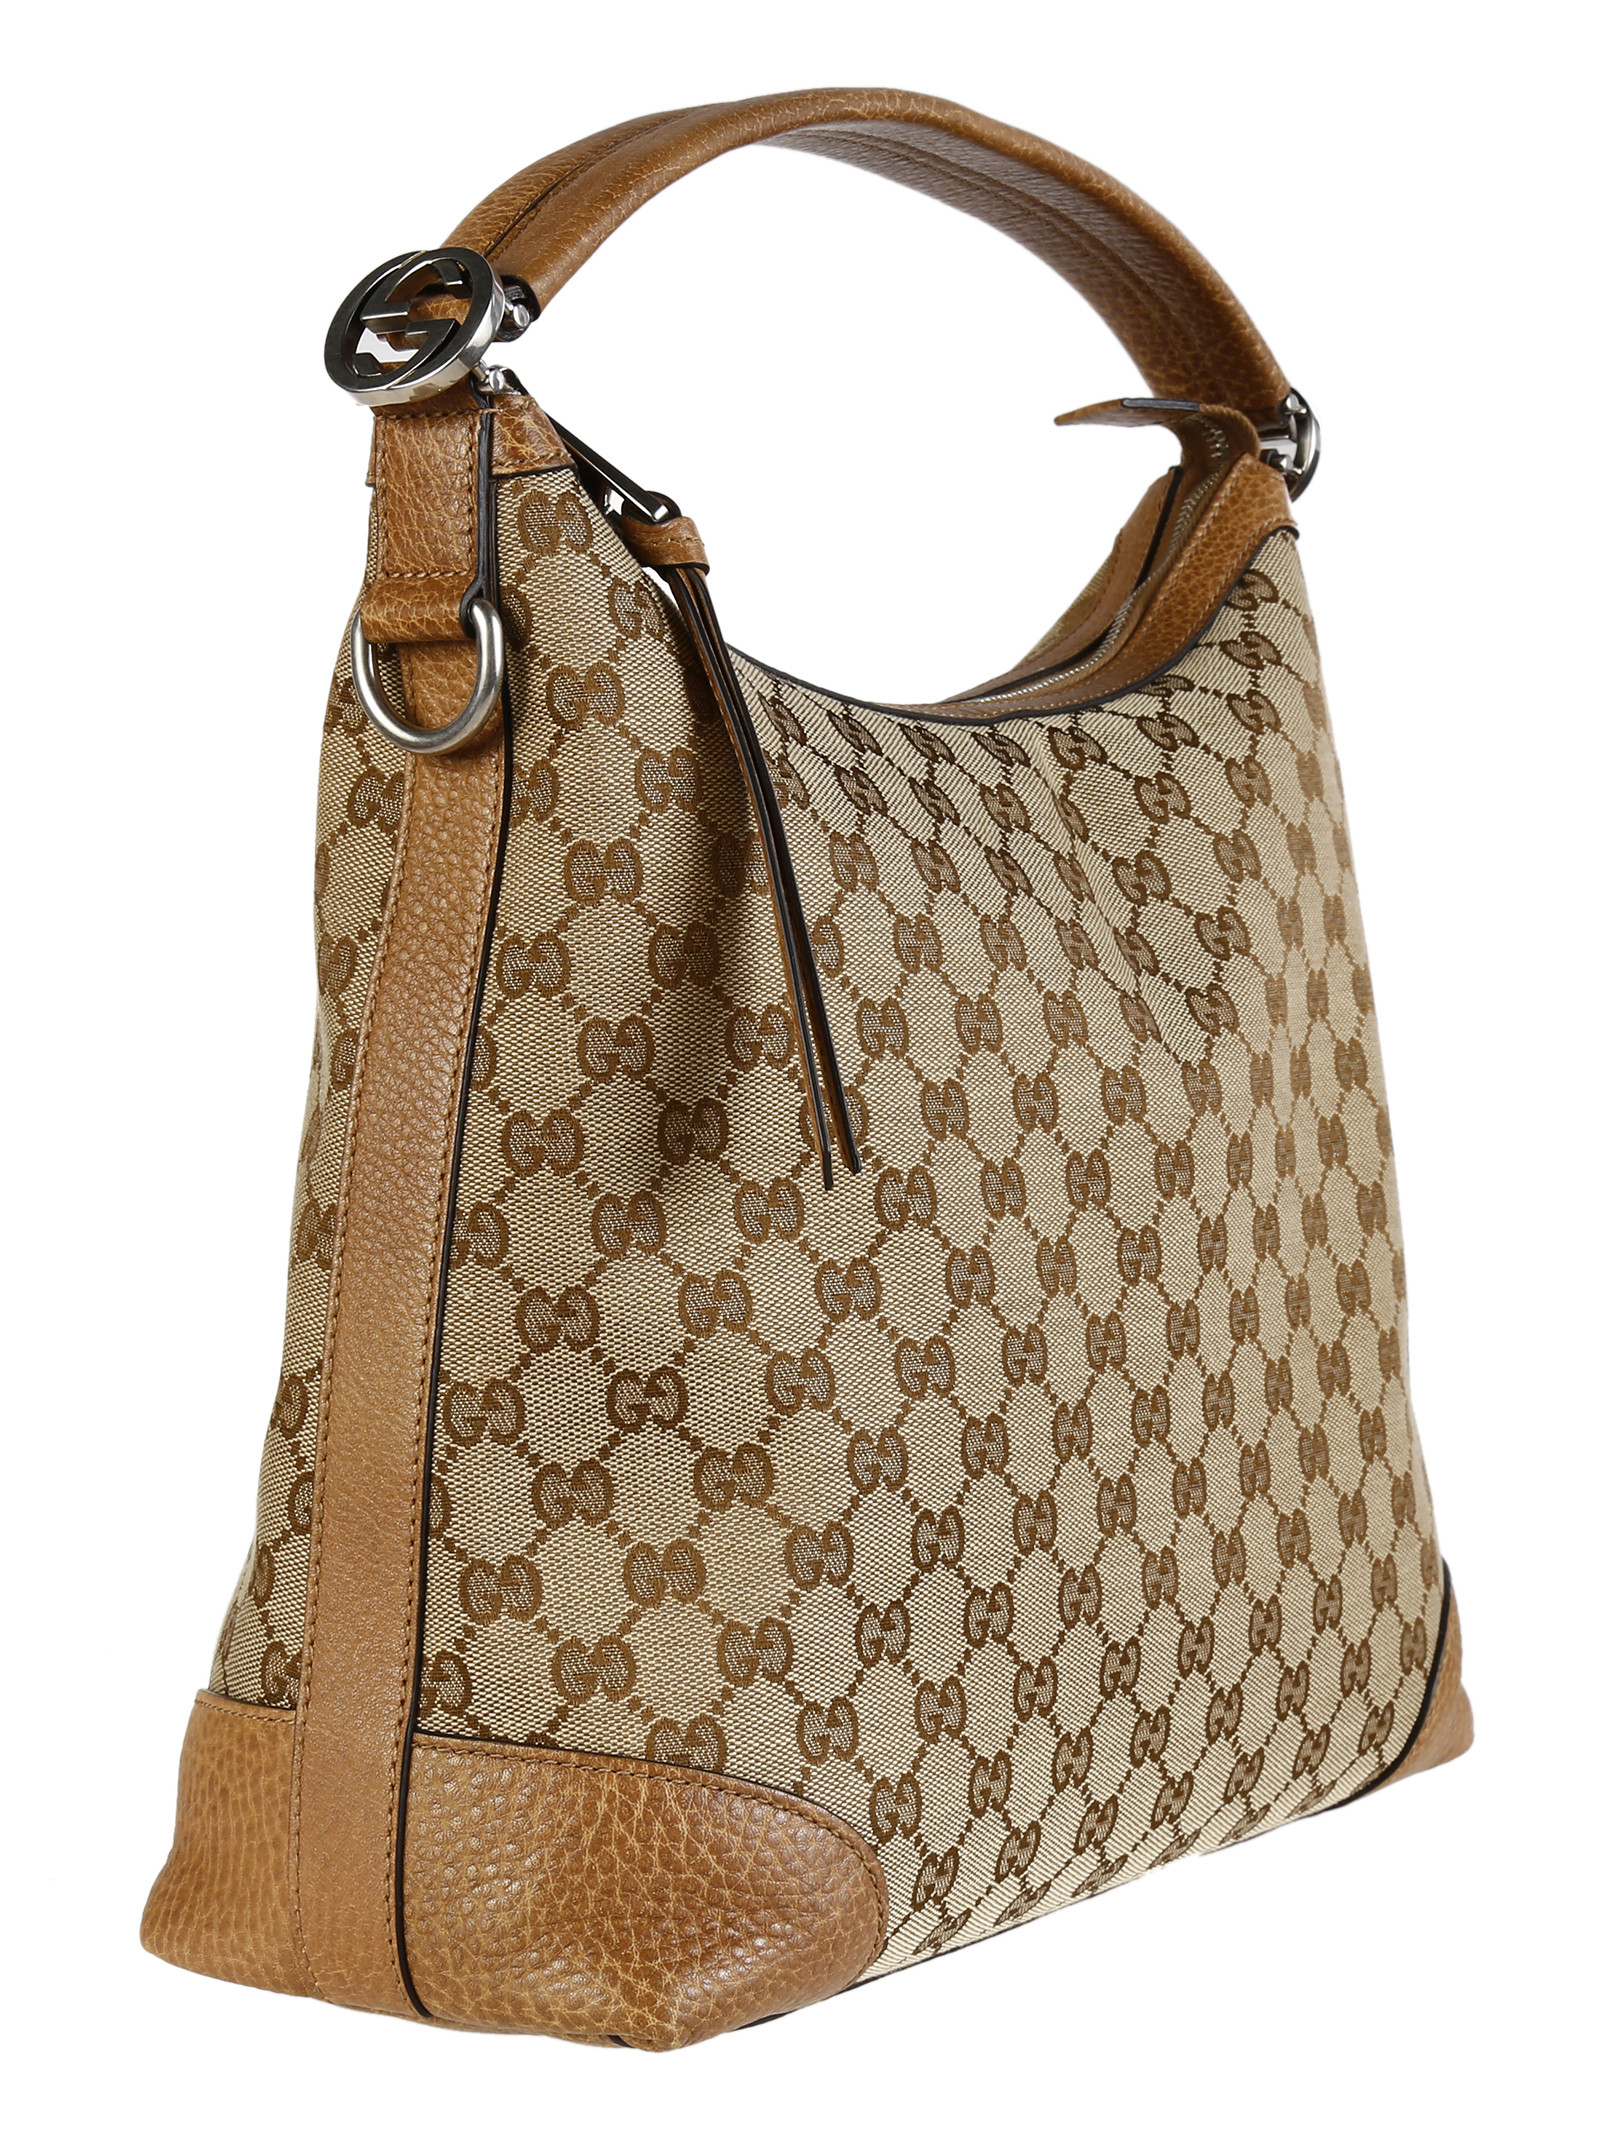 Gucci Original Gg Miss Gg Small Hobo Bag in Beige (Beige Ebony/Old Natural) | Lyst